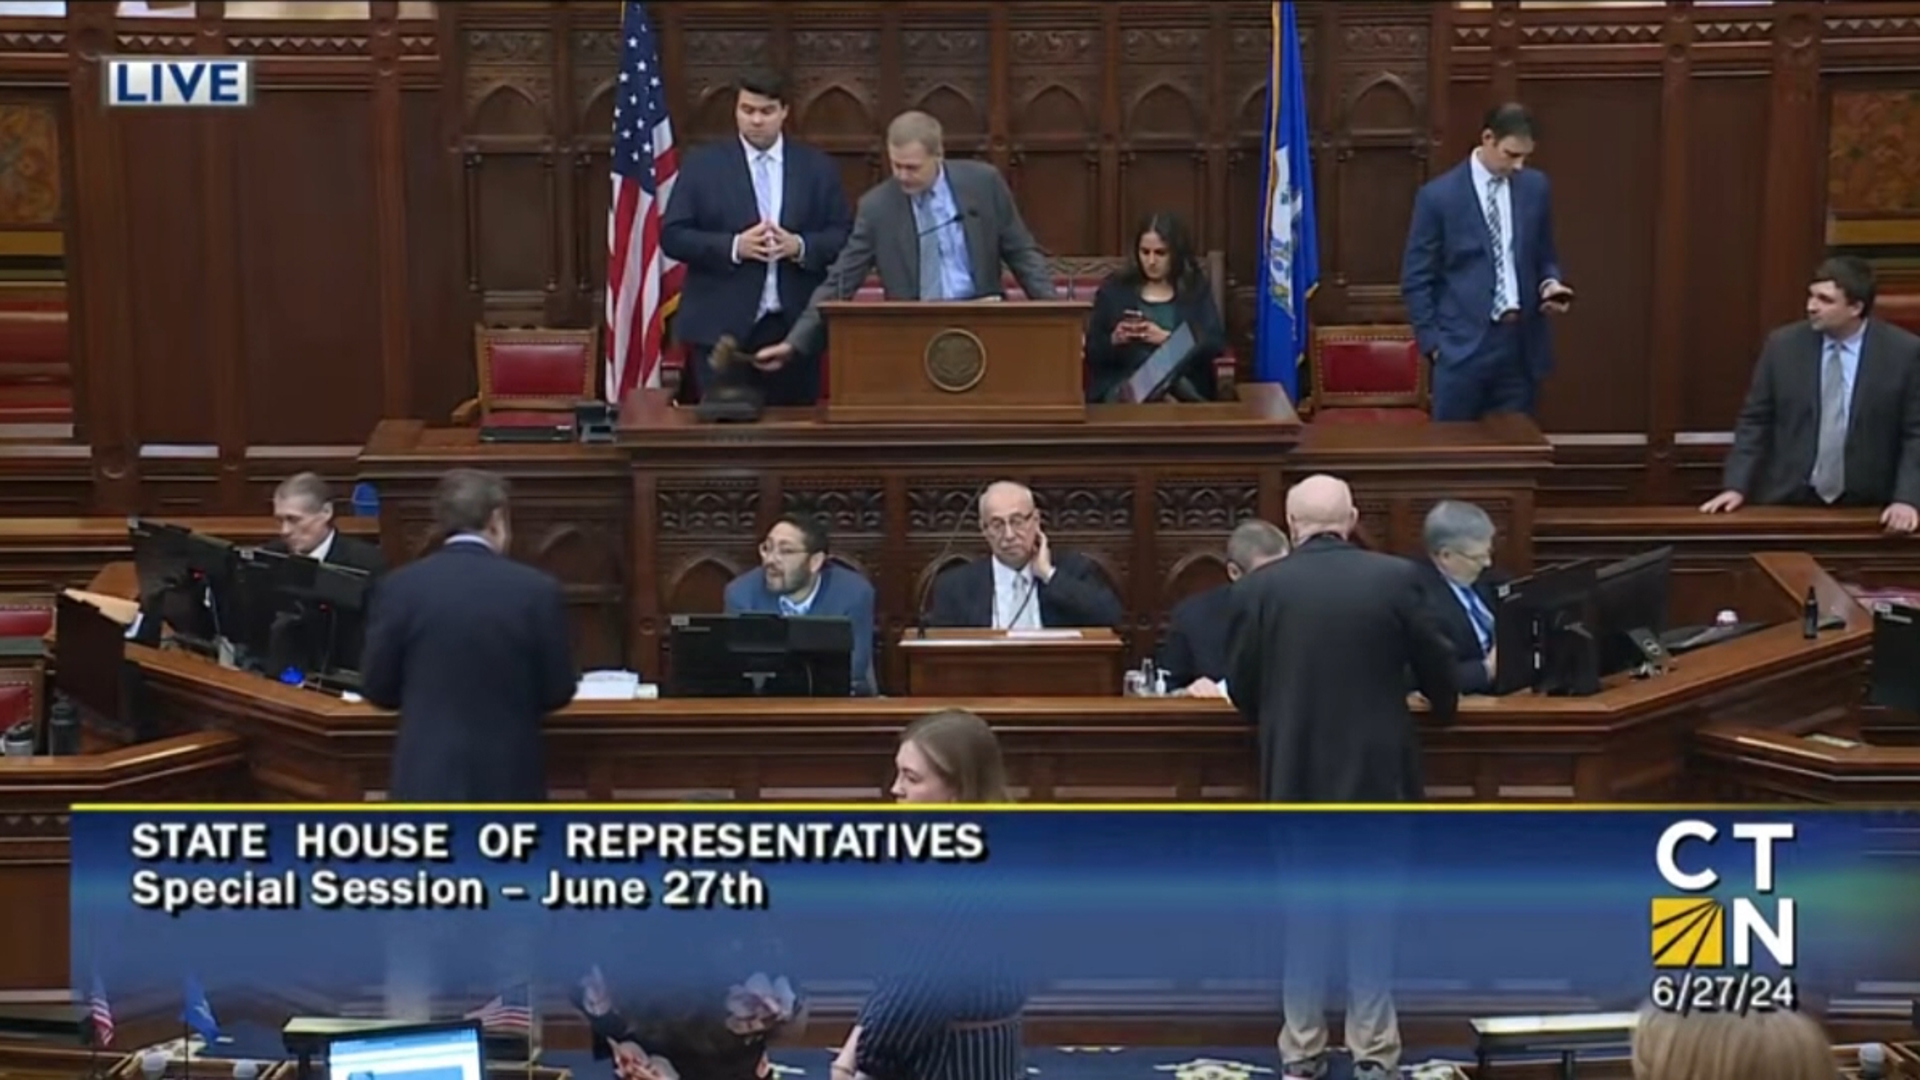 The Connecticut House gathered for the second day of a special session.